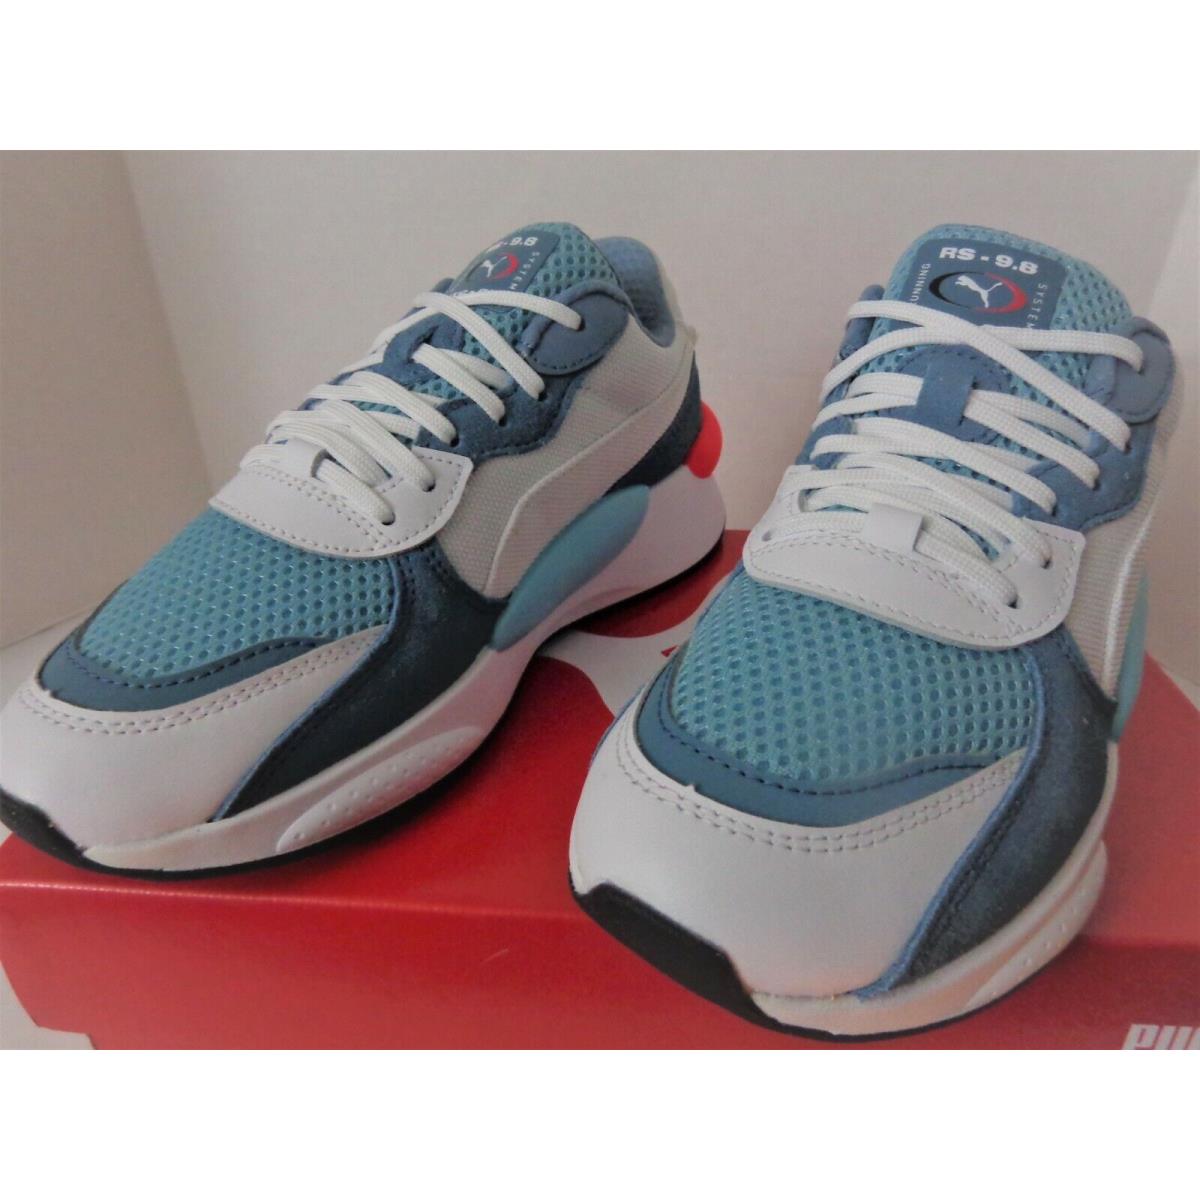 Puma RS 9.8 Cosmic Running Shoes. New. Womens Size: 6.5